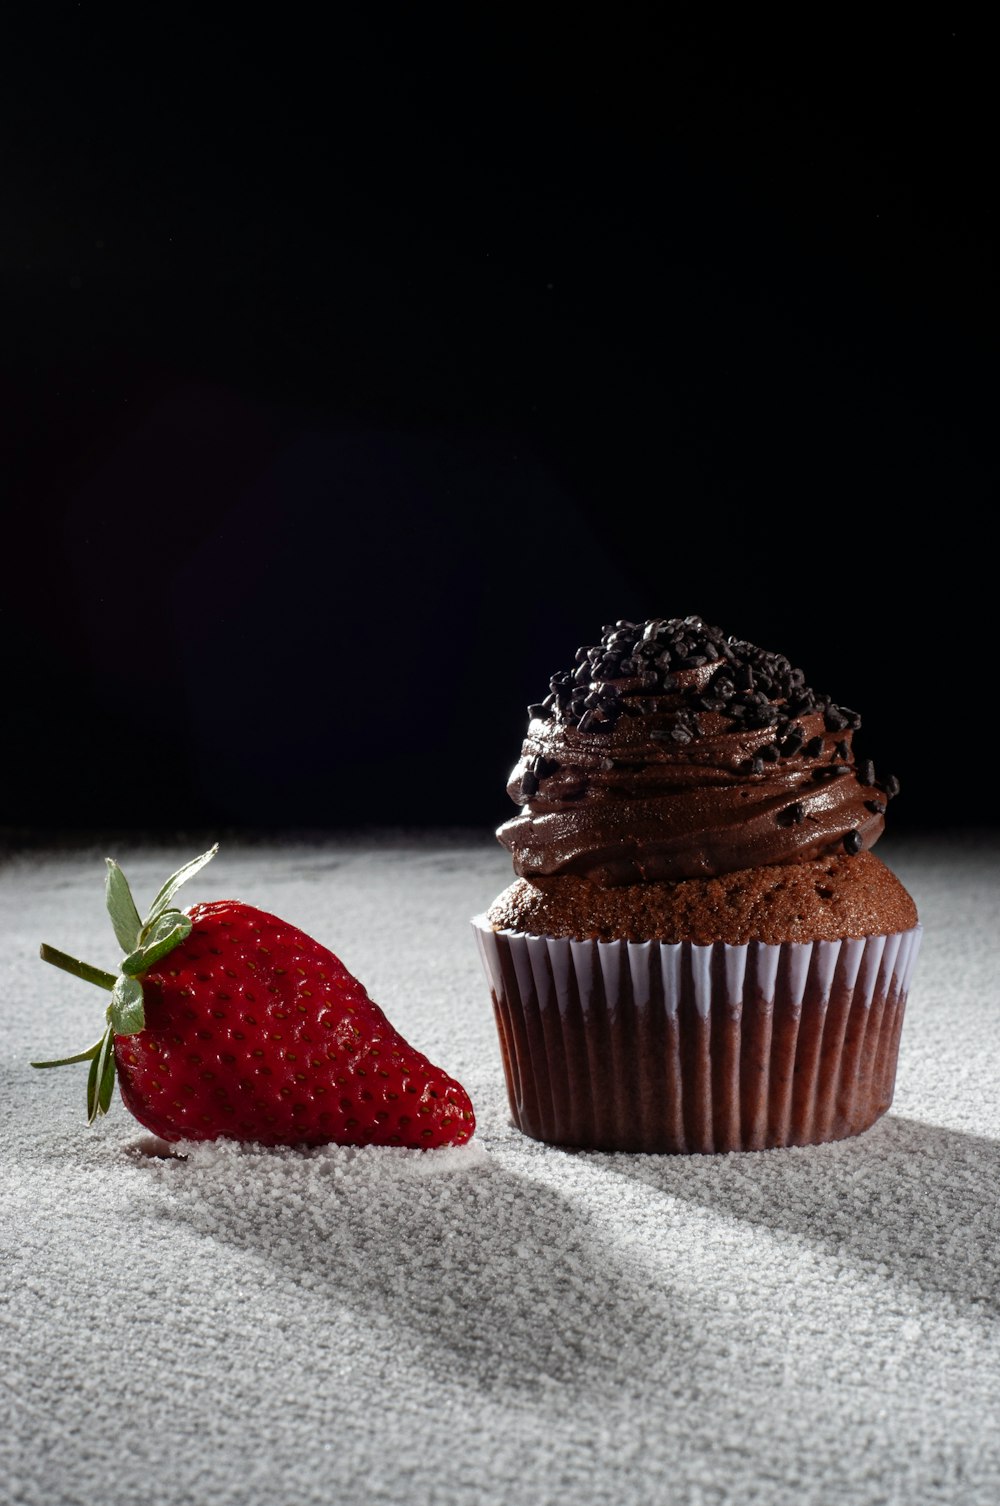 a chocolate cupcake with a strawberry on the side